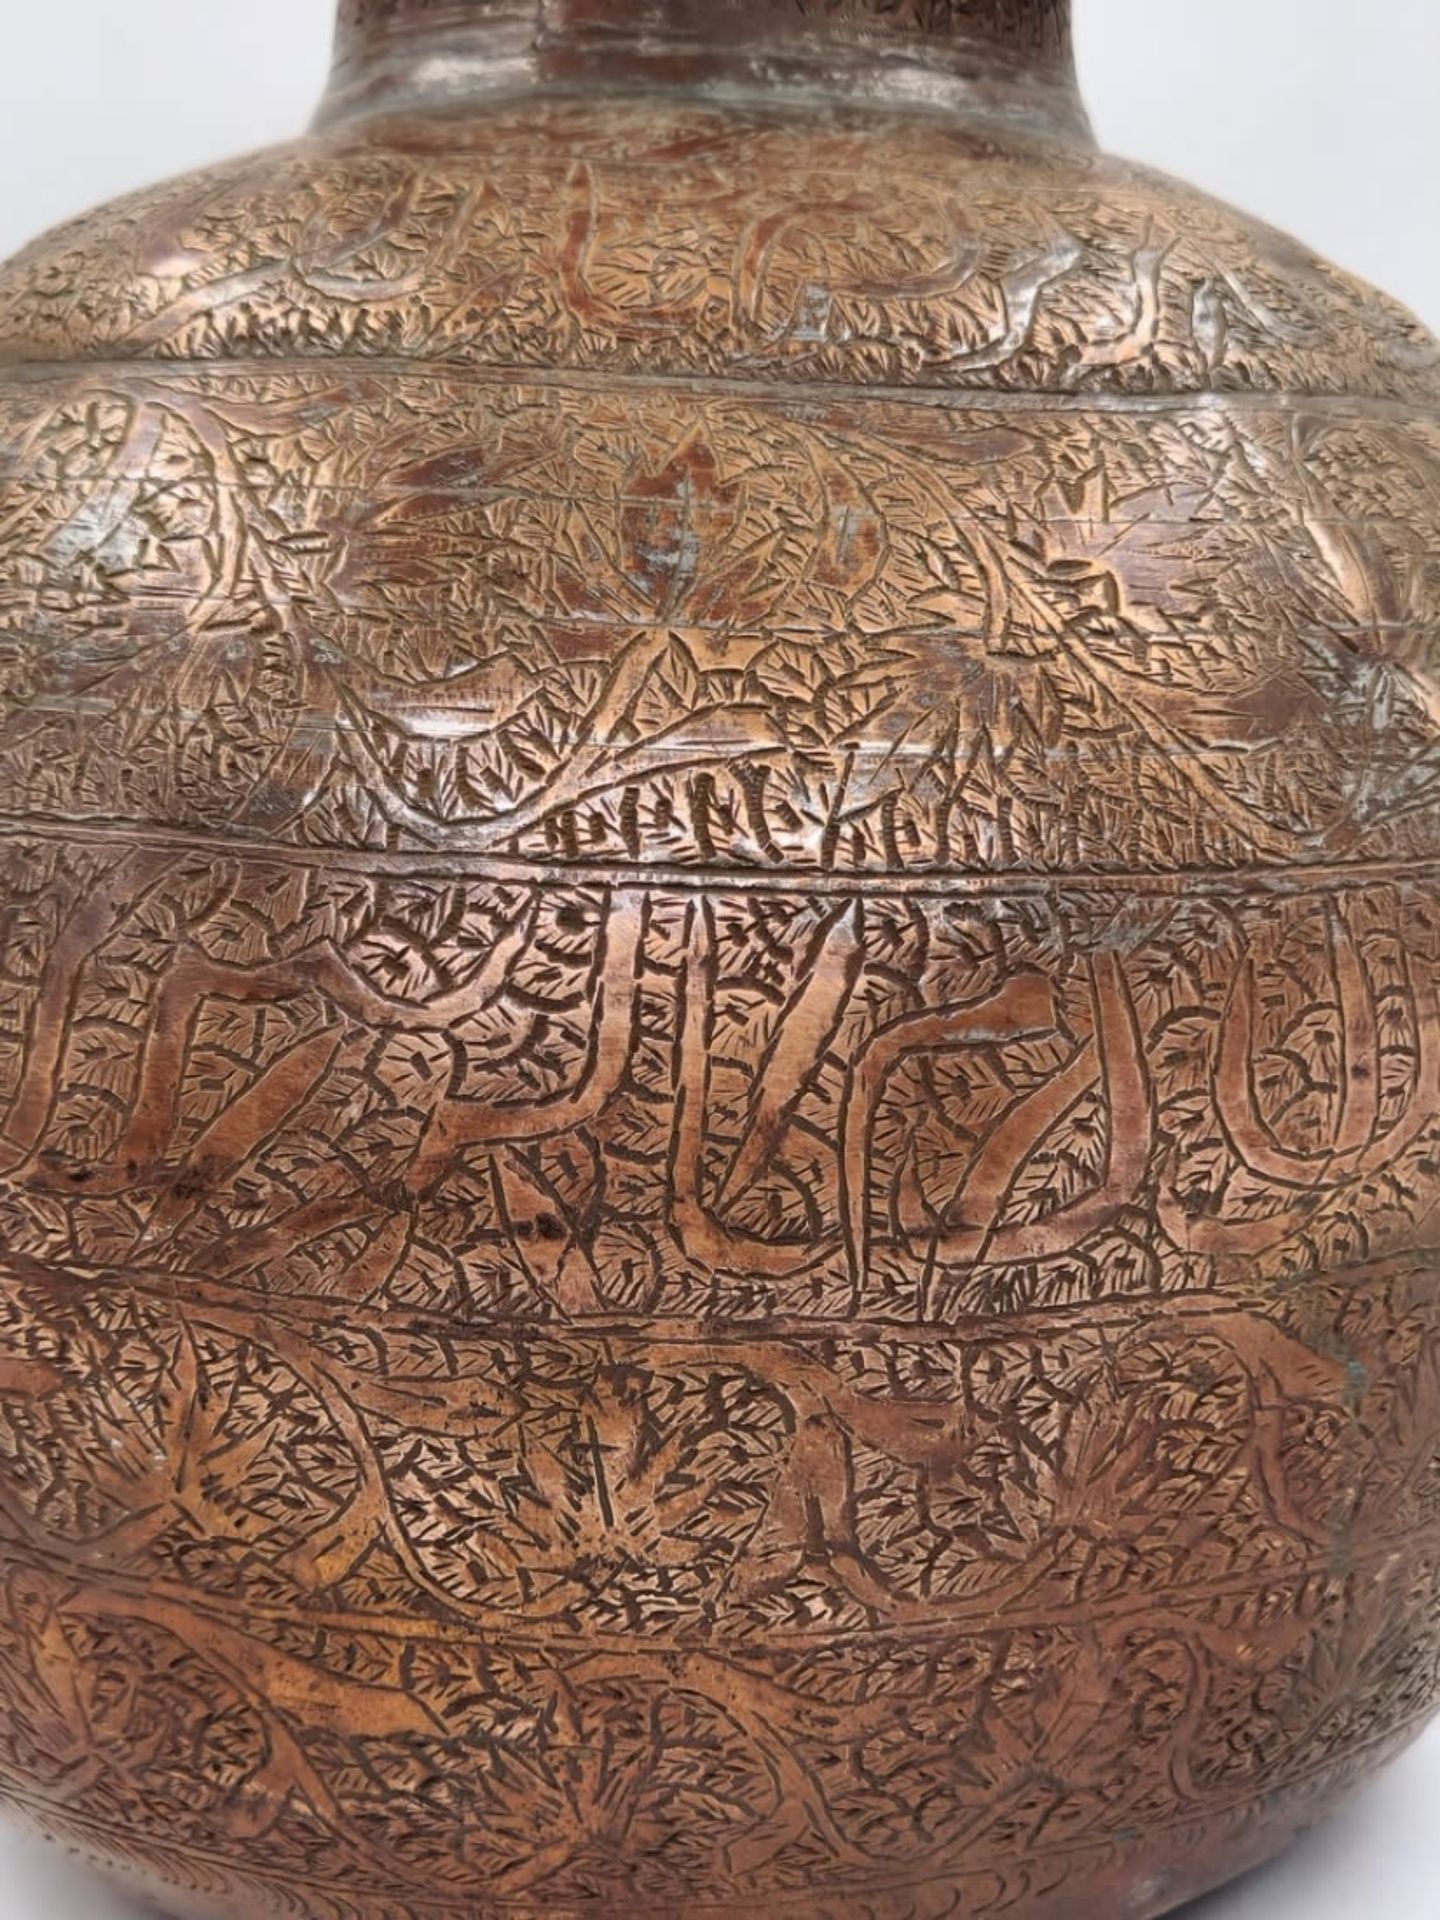 A large and beautiful antique Asian water jug from the 19th century, made in the Dhamrai region, - Image 5 of 8